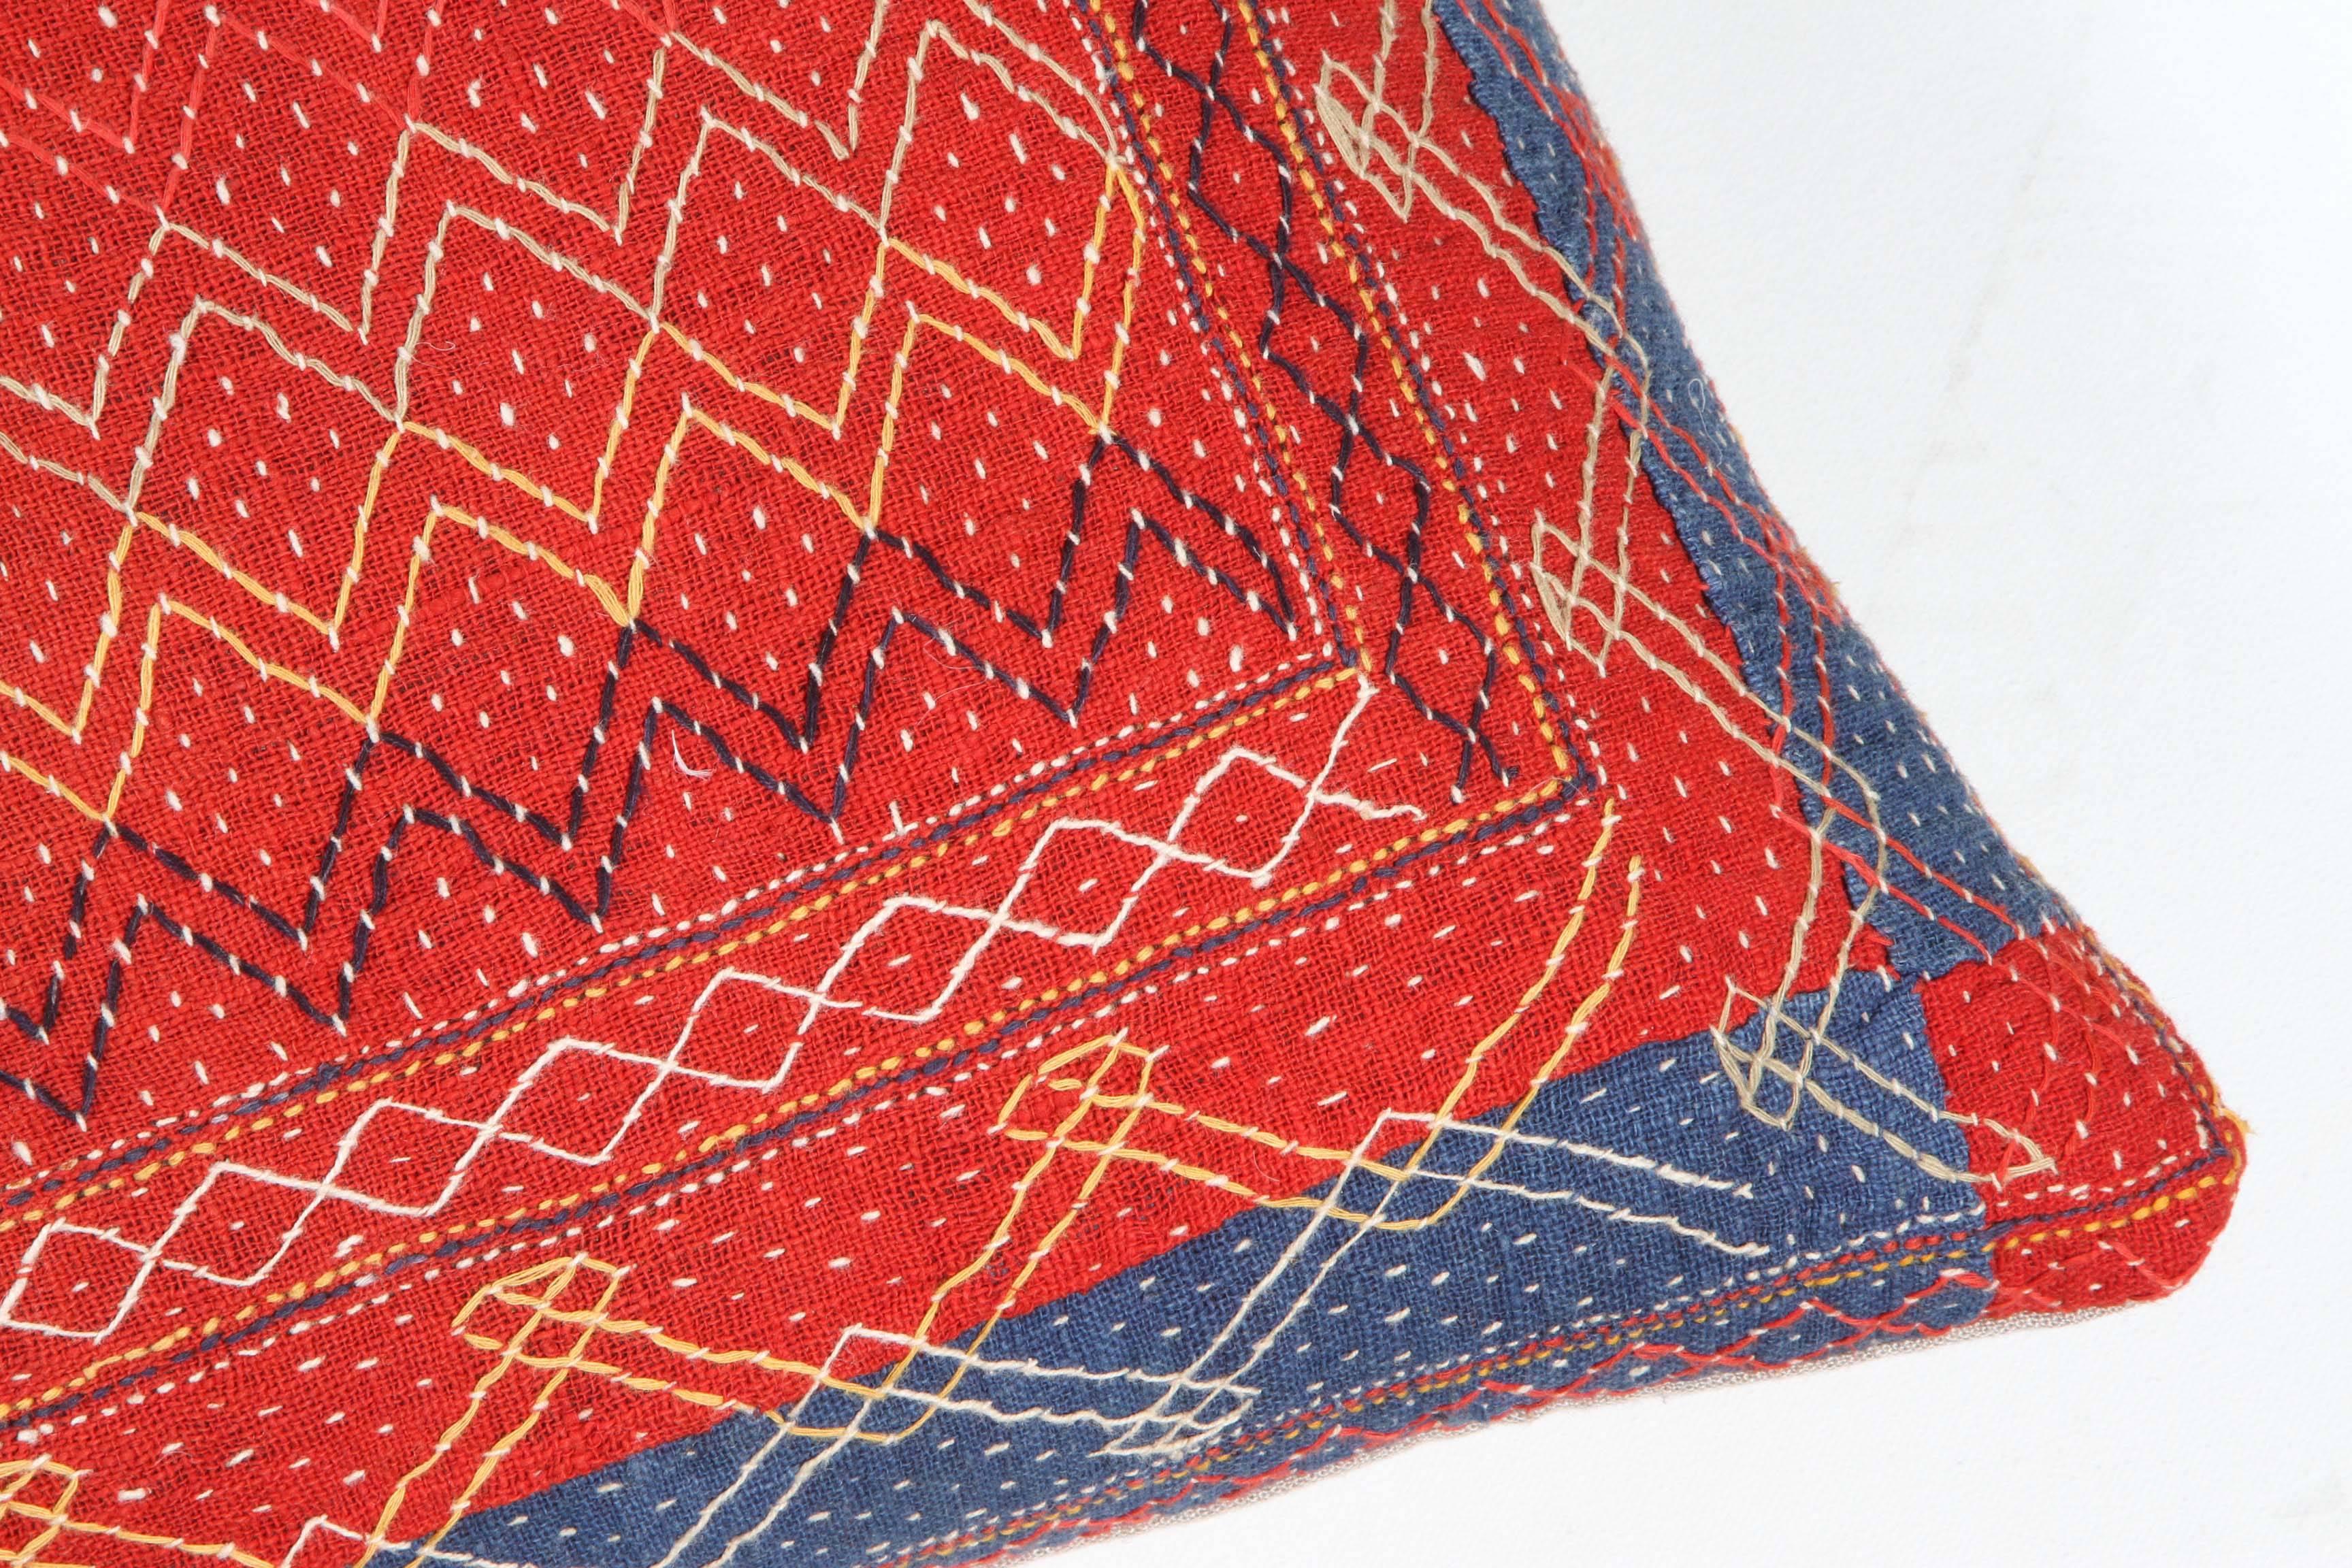 Indian Banjara Cotton Bag Face Pillow in Red, Blue, Yellow, White and Black In Good Condition For Sale In Los Angeles, CA